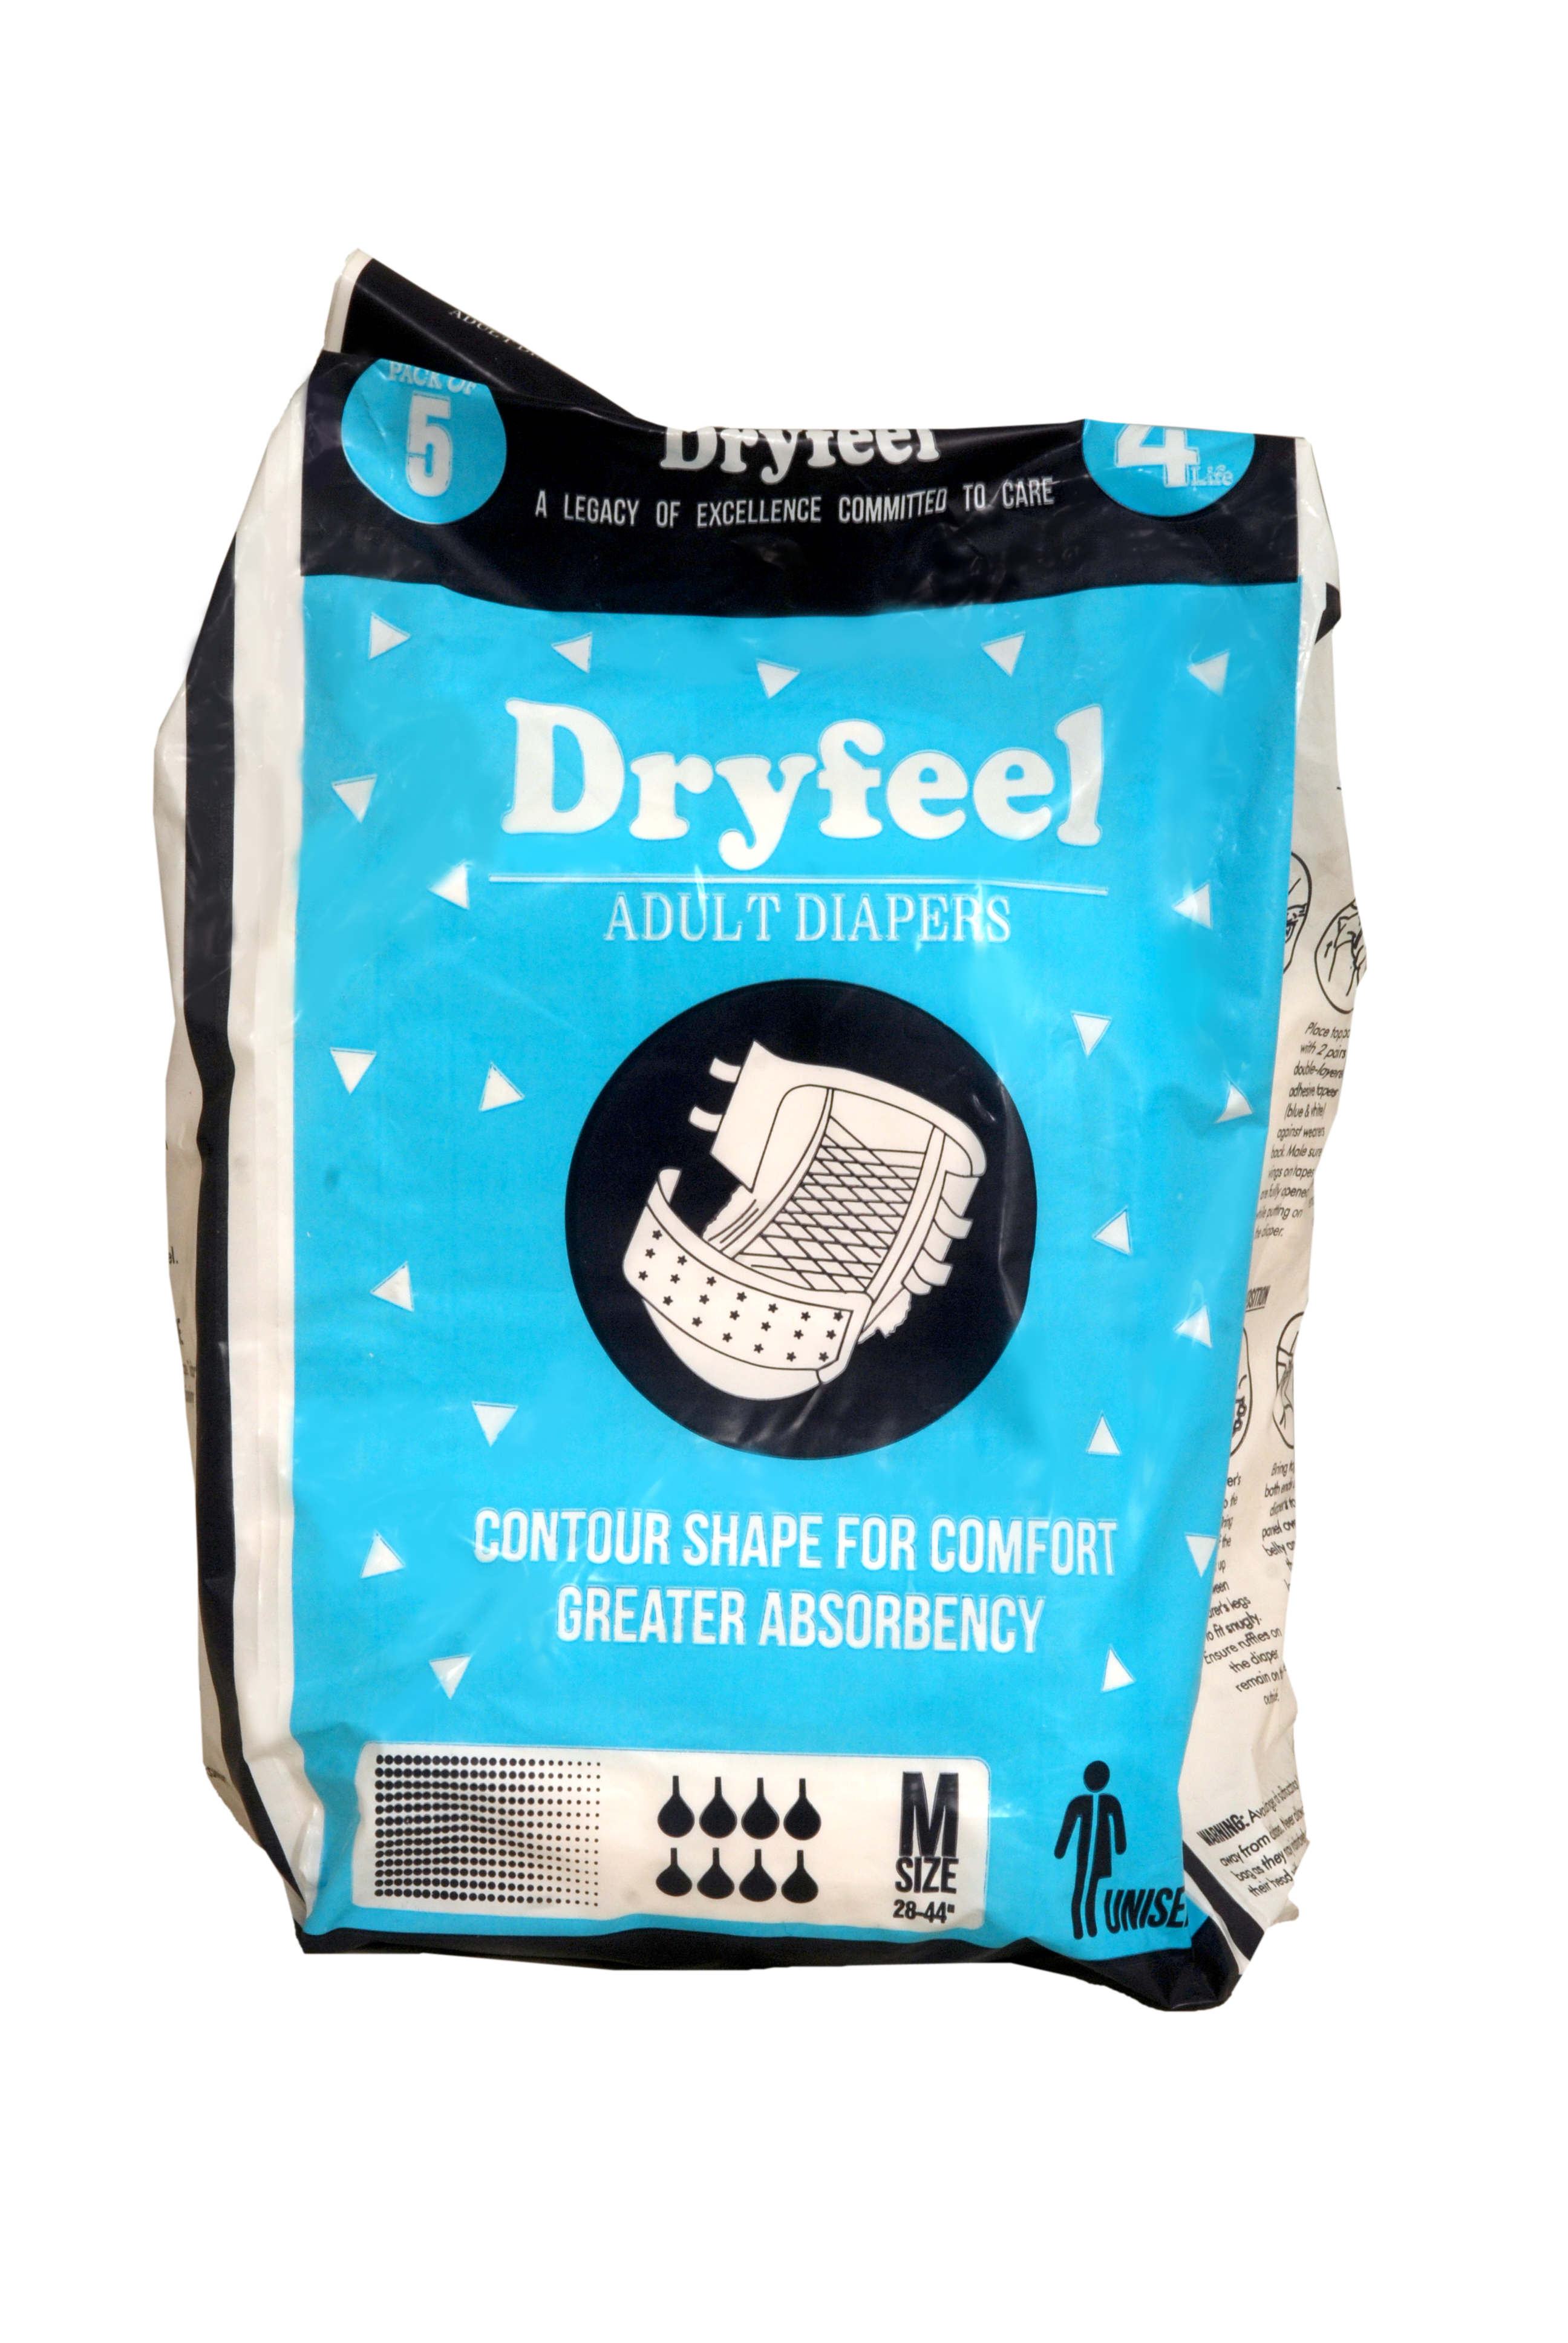 Dryfeel Contour Shaped Adult Diaper